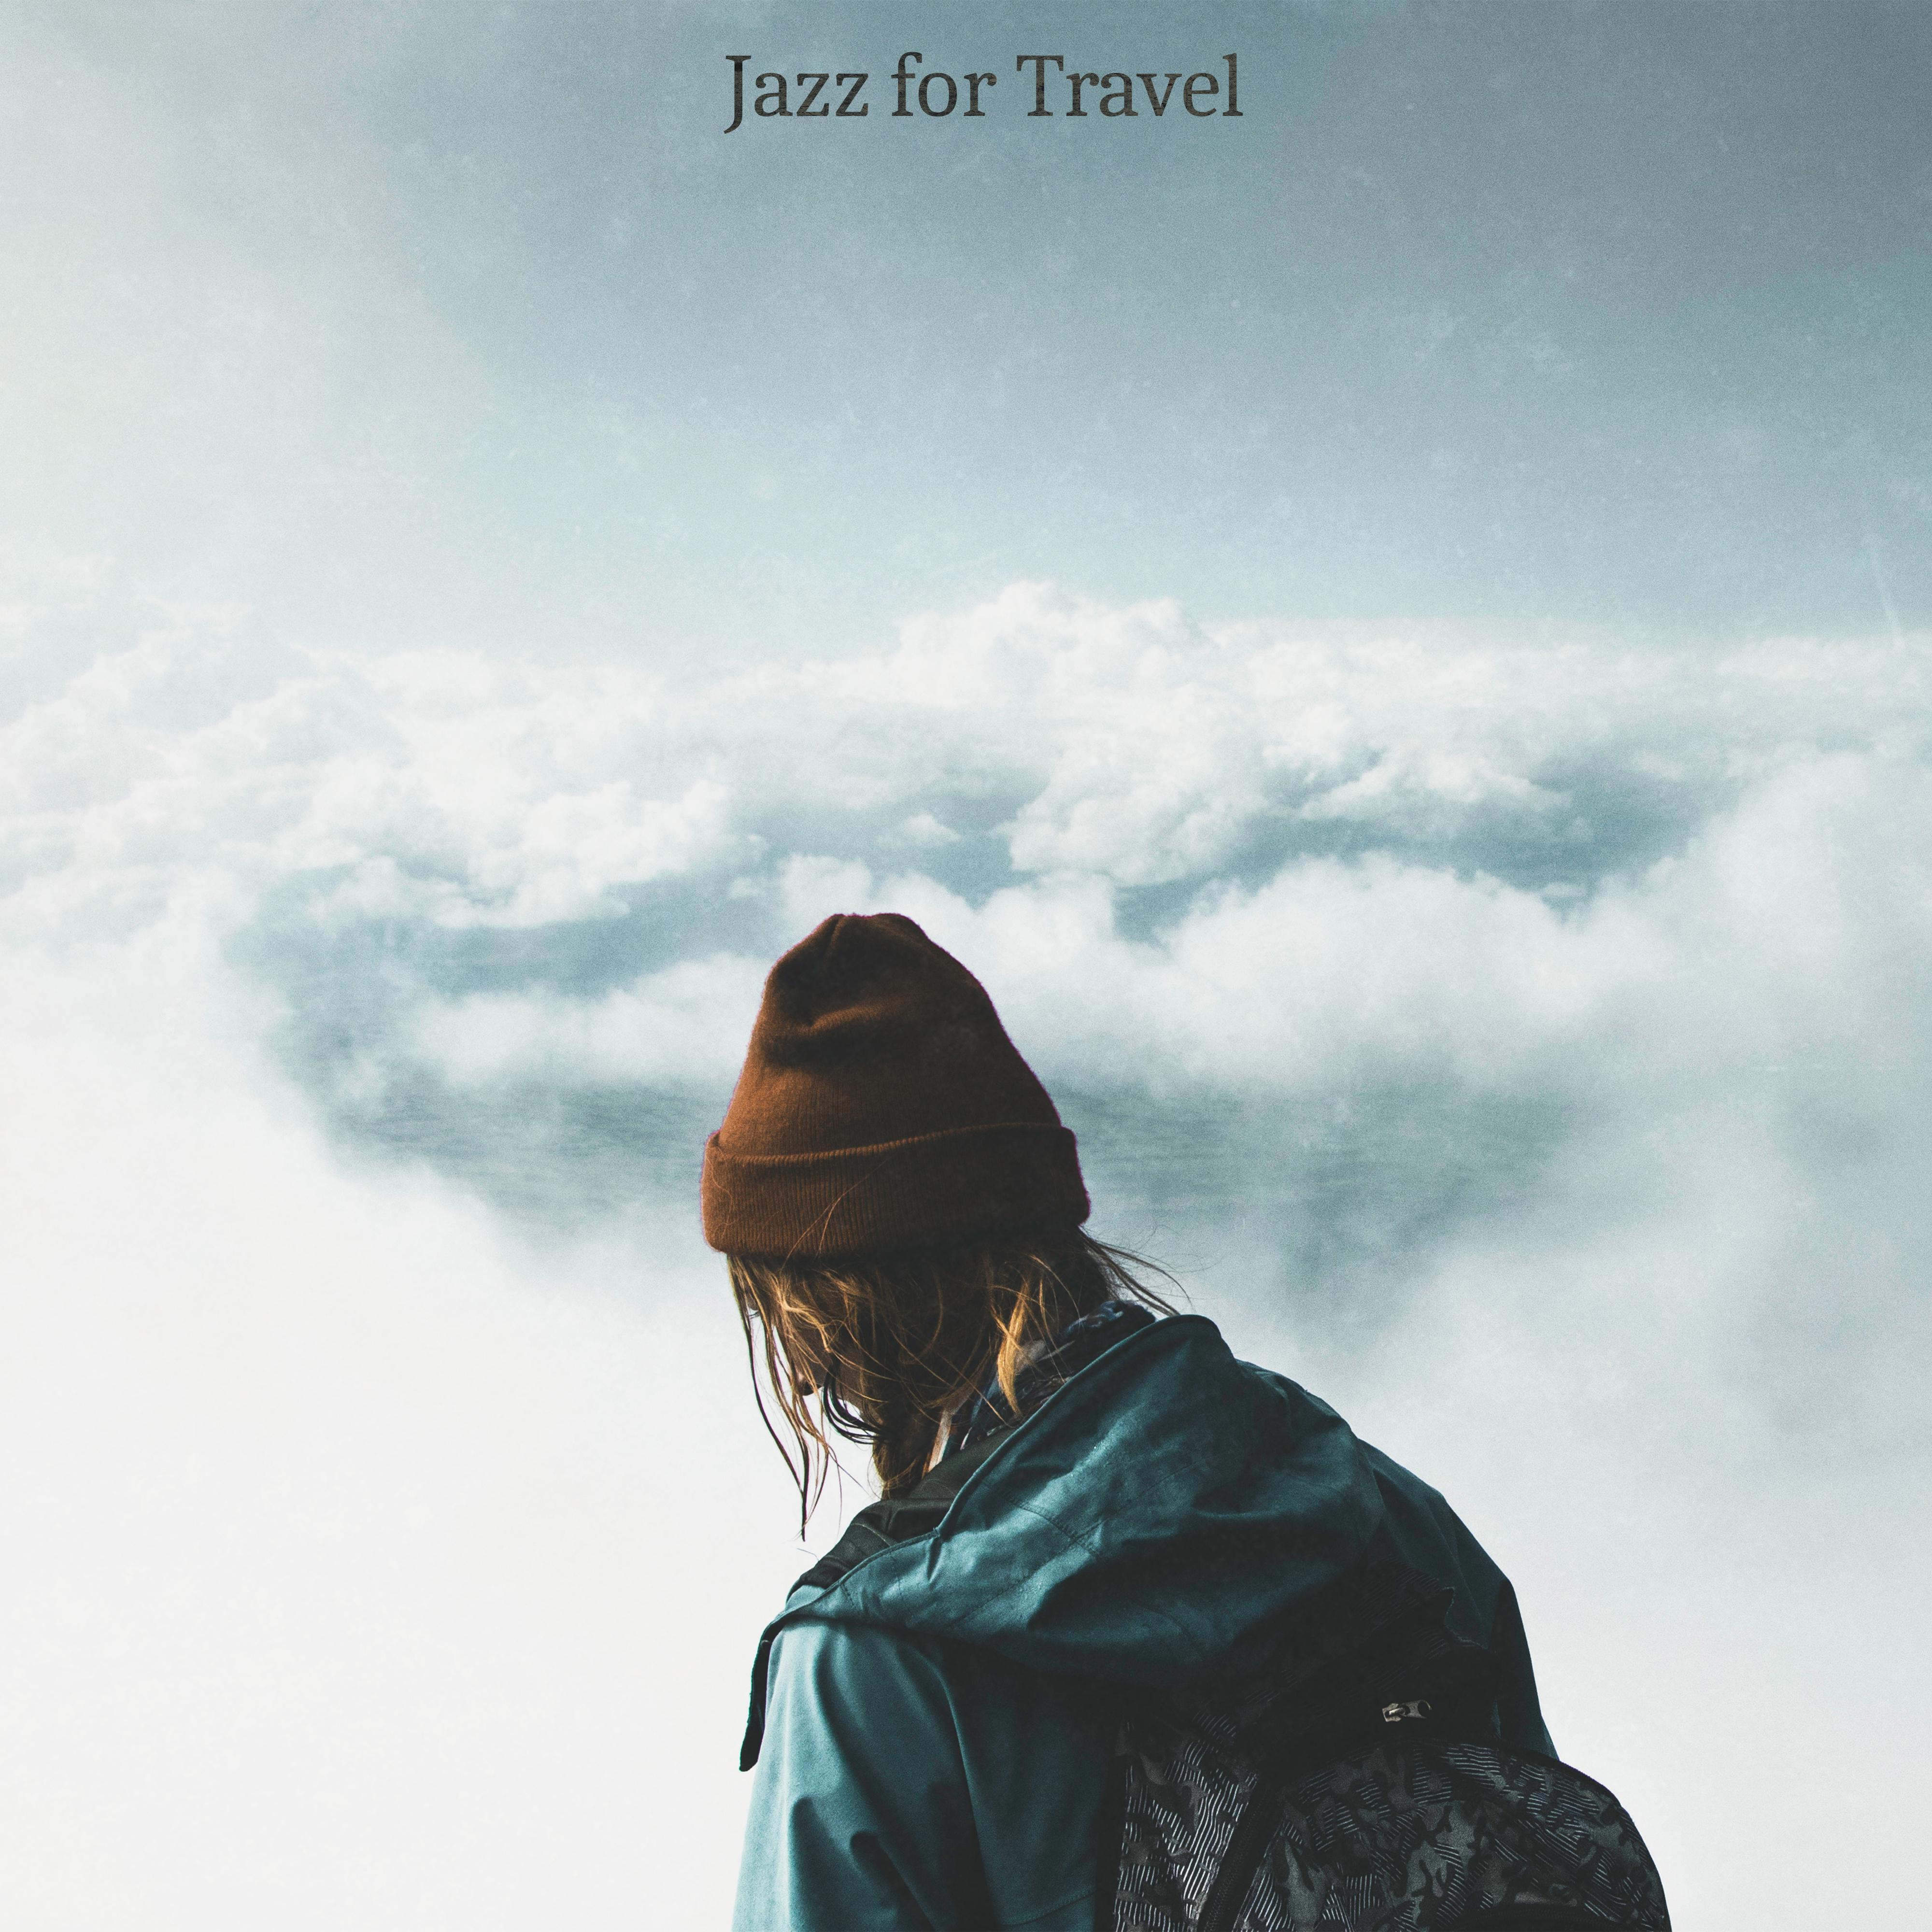 Jazz for Travel  Music for Long and Short Trips, Travel by Car or Plane, for Holidays by the Sea or in the Mountains, to Relax at Home or on the Beach